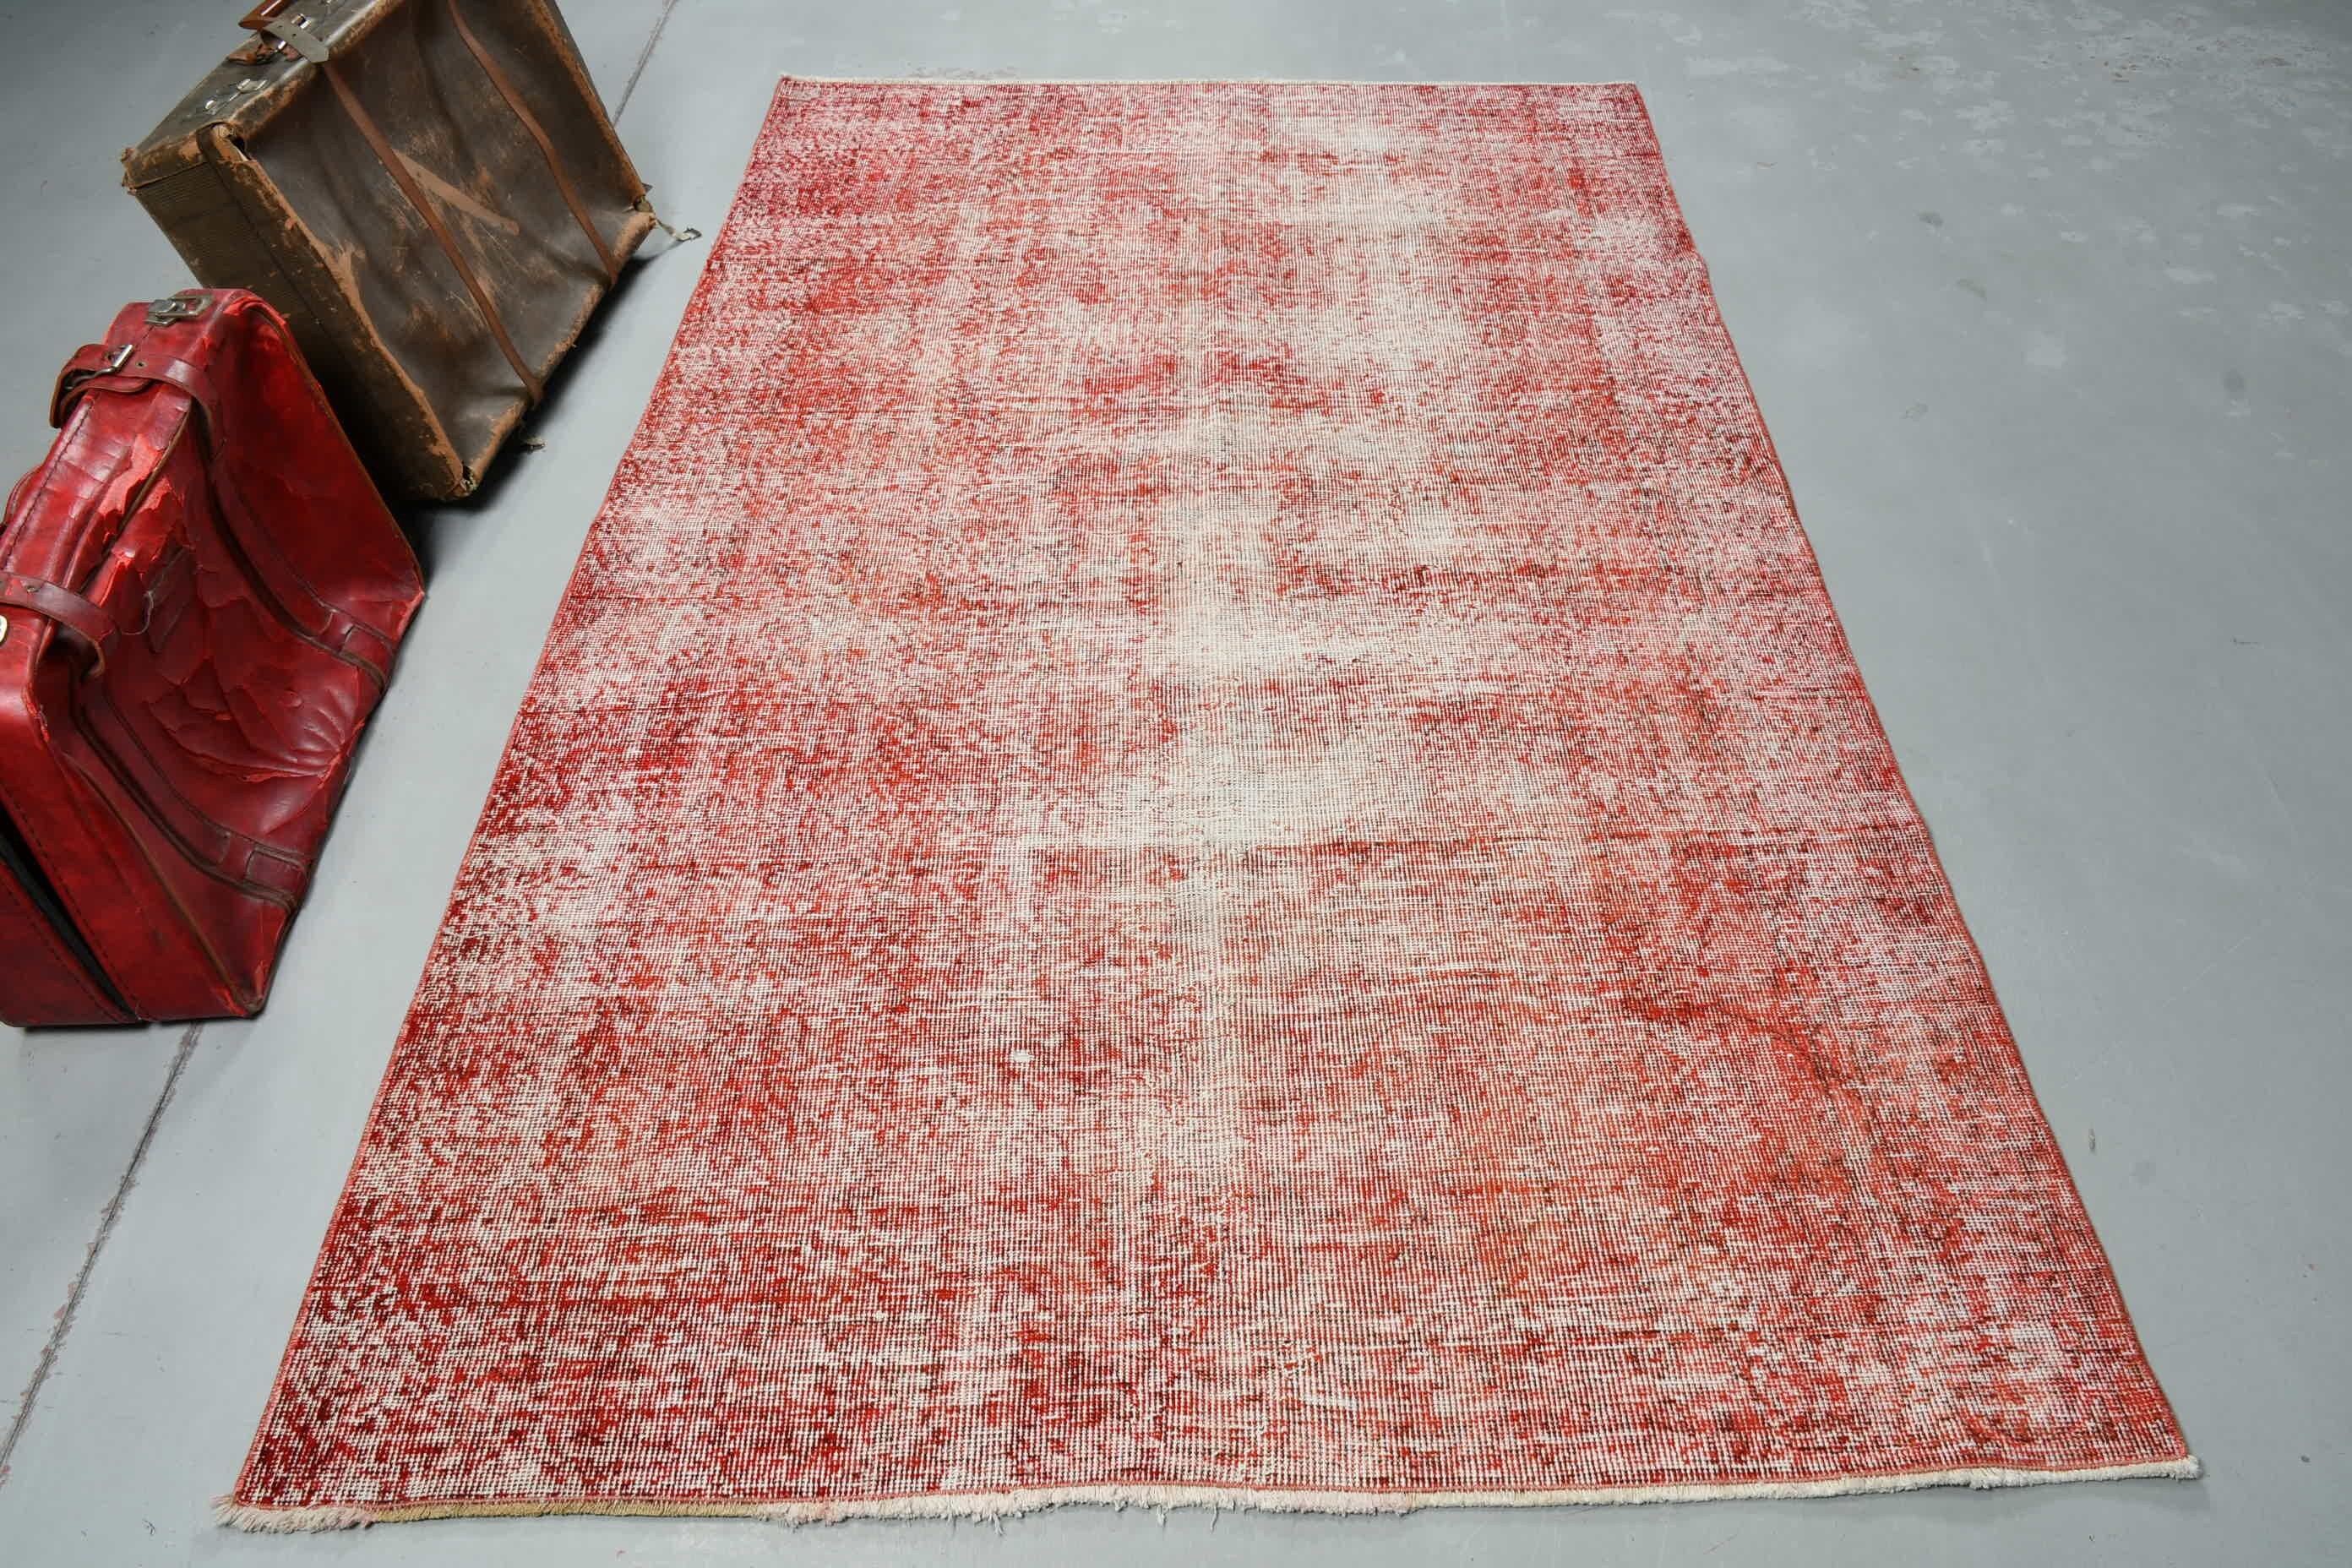 Red Moroccan Rugs, Vintage Rug, Vintage Decor Rug, Rugs for Area, Kitchen Rugs, Turkish Rug, Floor Rug, 4.7x7.5 ft Area Rug, Antique Rugs